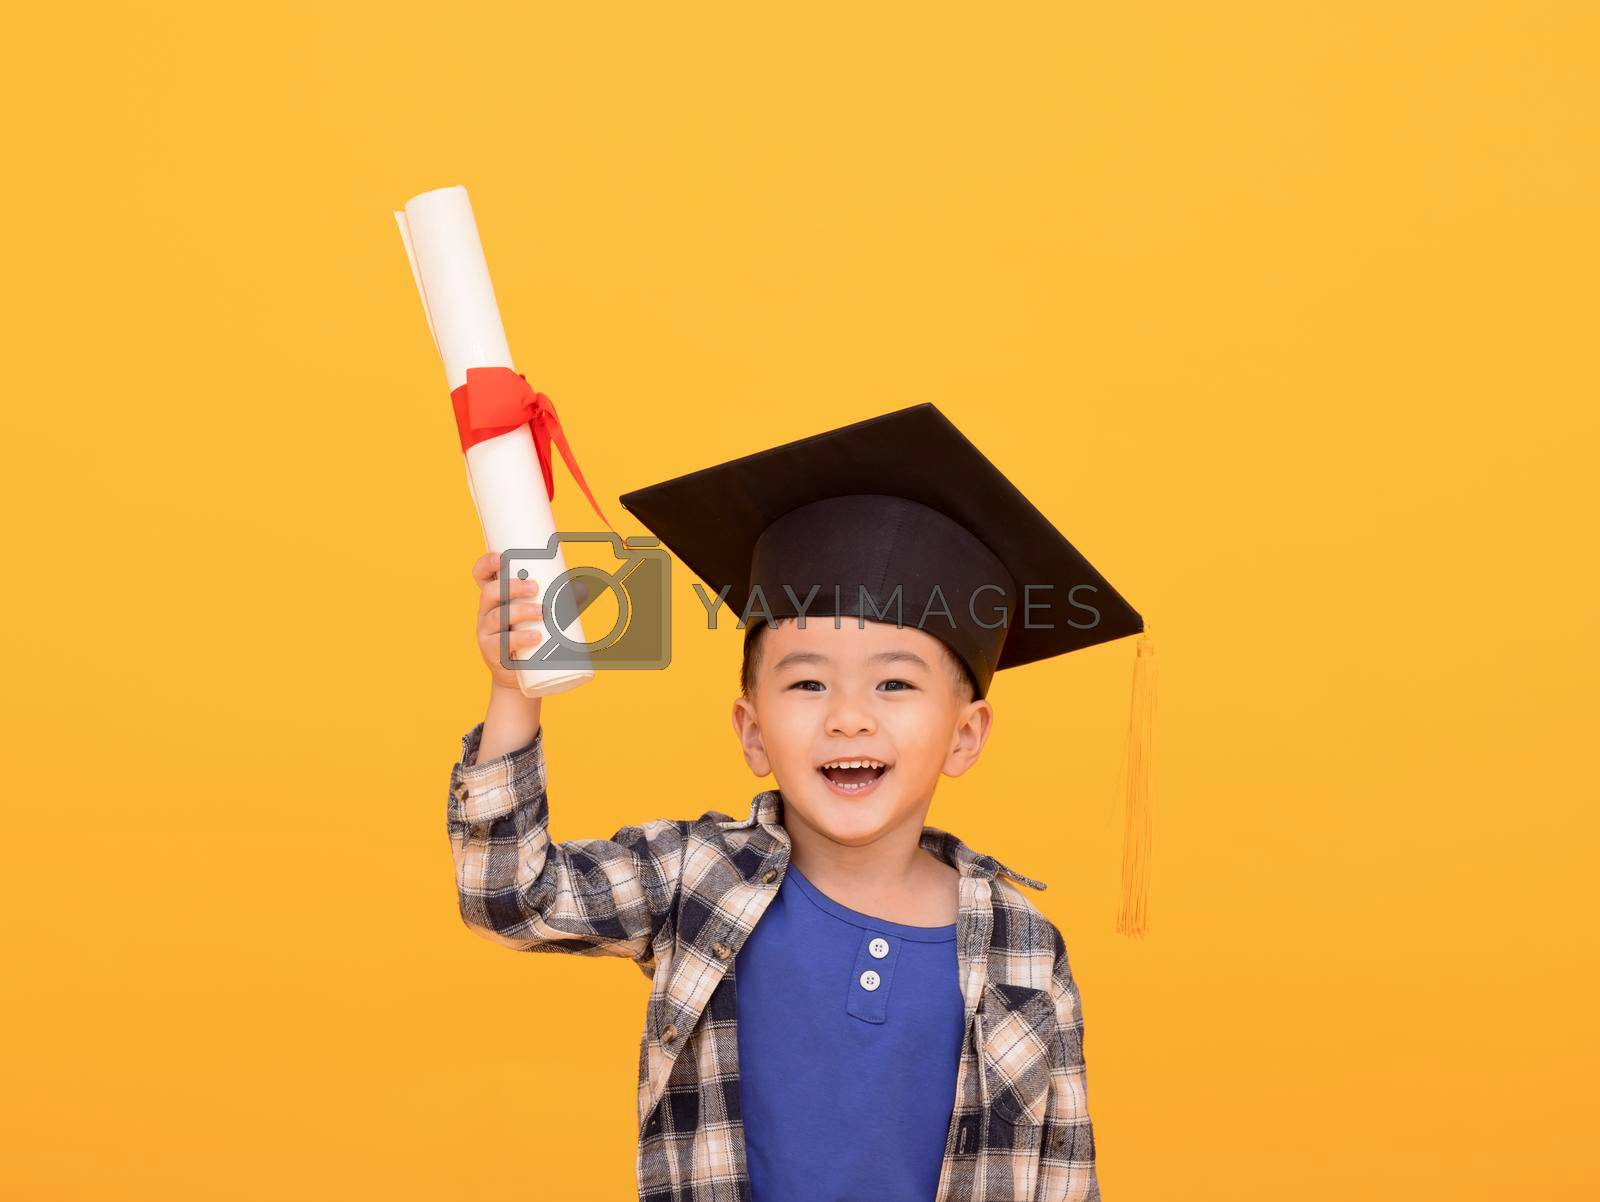 Royalty free image of Happy Asian school kid graduate in graduation cap by tomwang